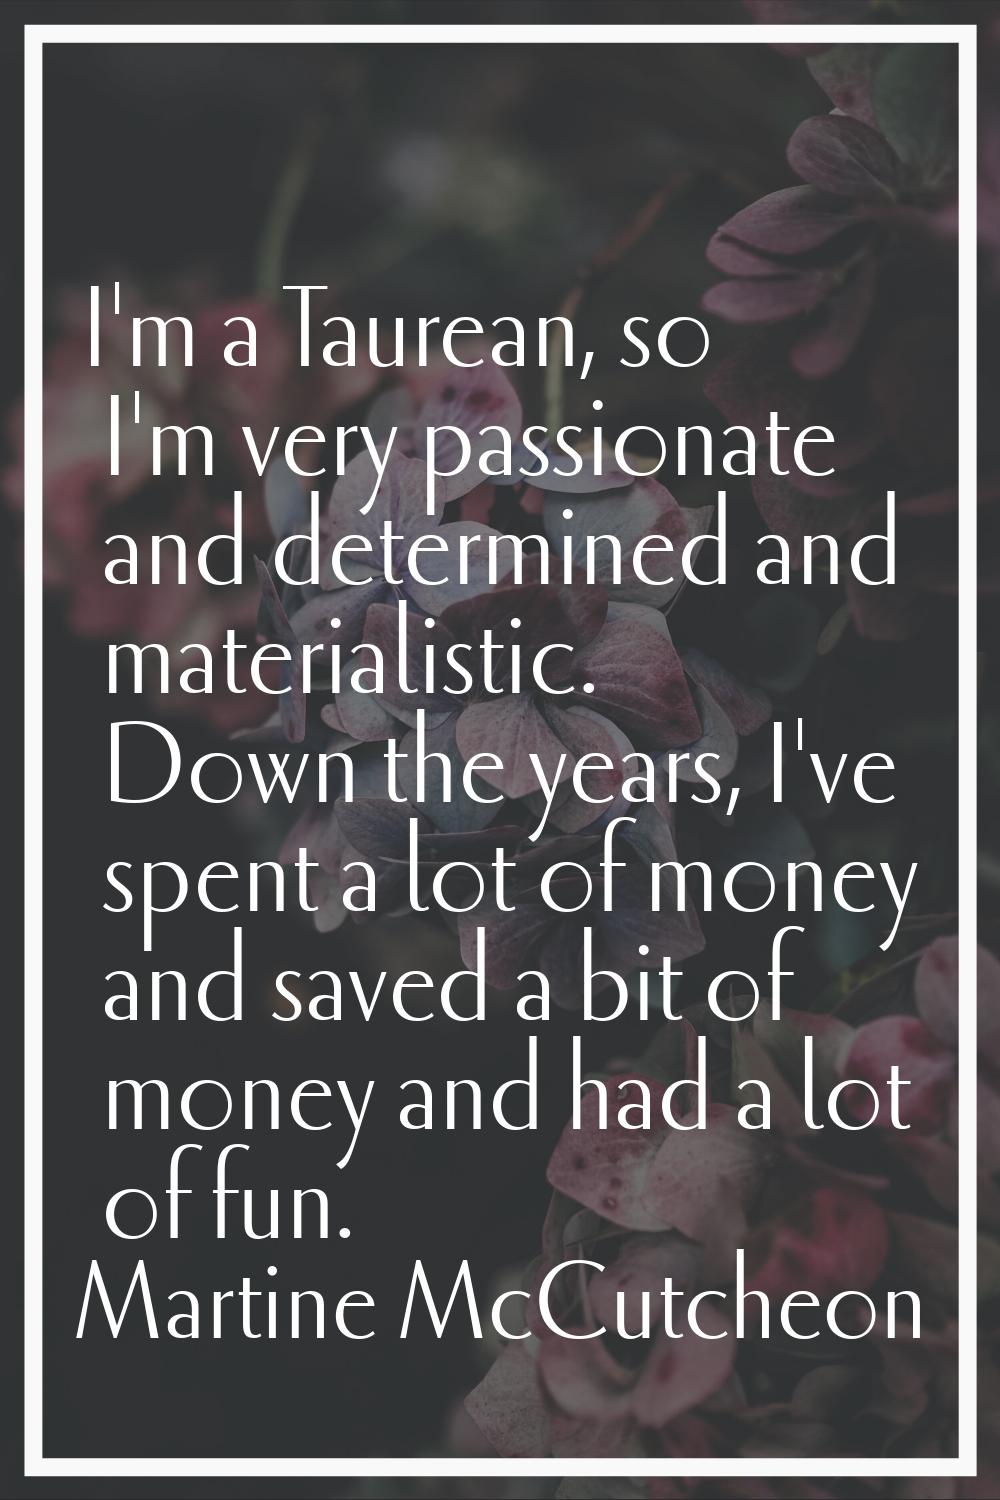 I'm a Taurean, so I'm very passionate and determined and materialistic. Down the years, I've spent 